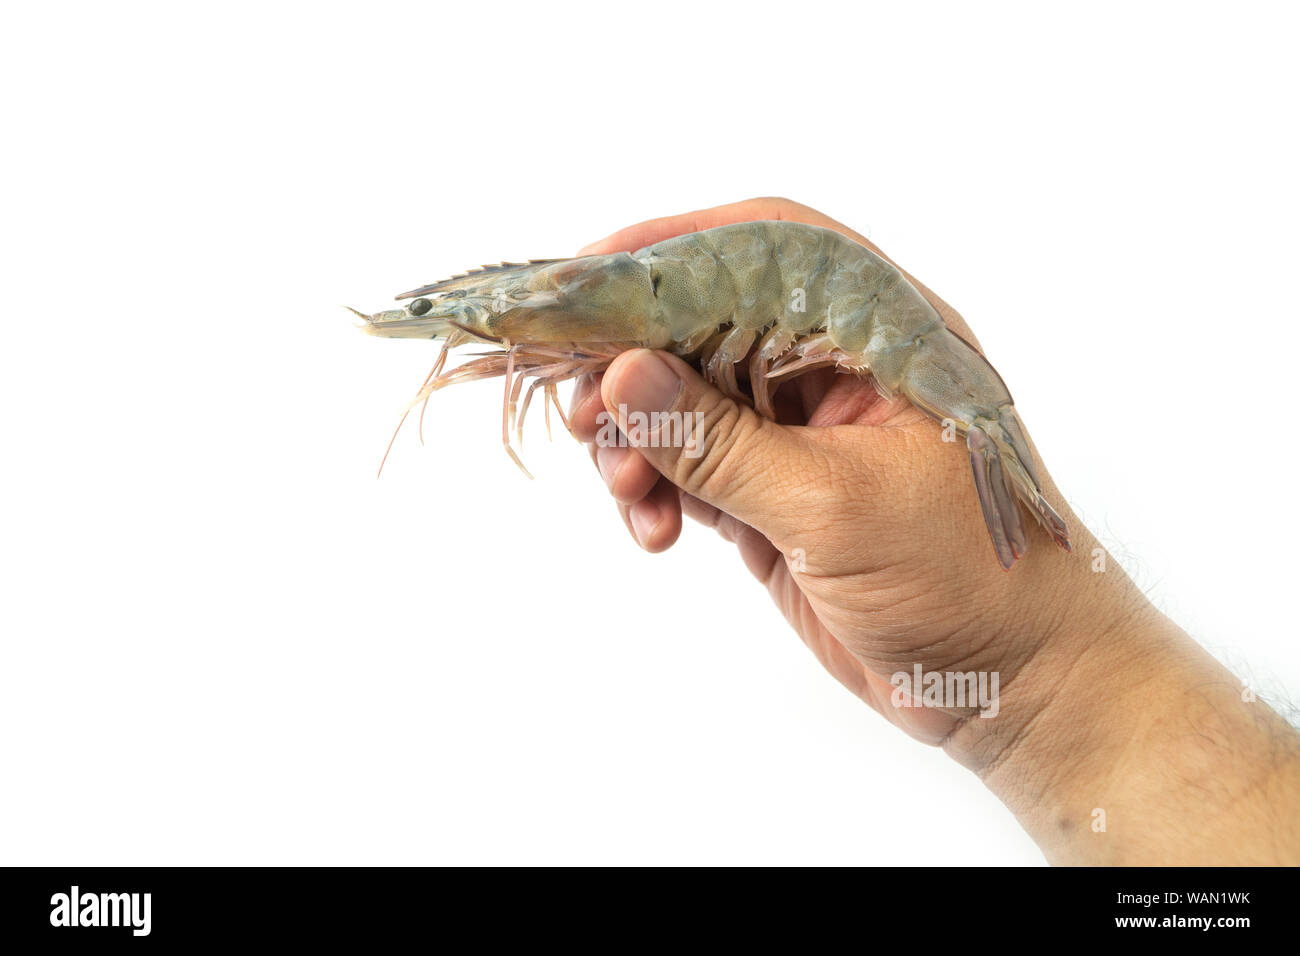 The hands of men are holding fresh raw pacific white shrimp on white background. Stock Photo